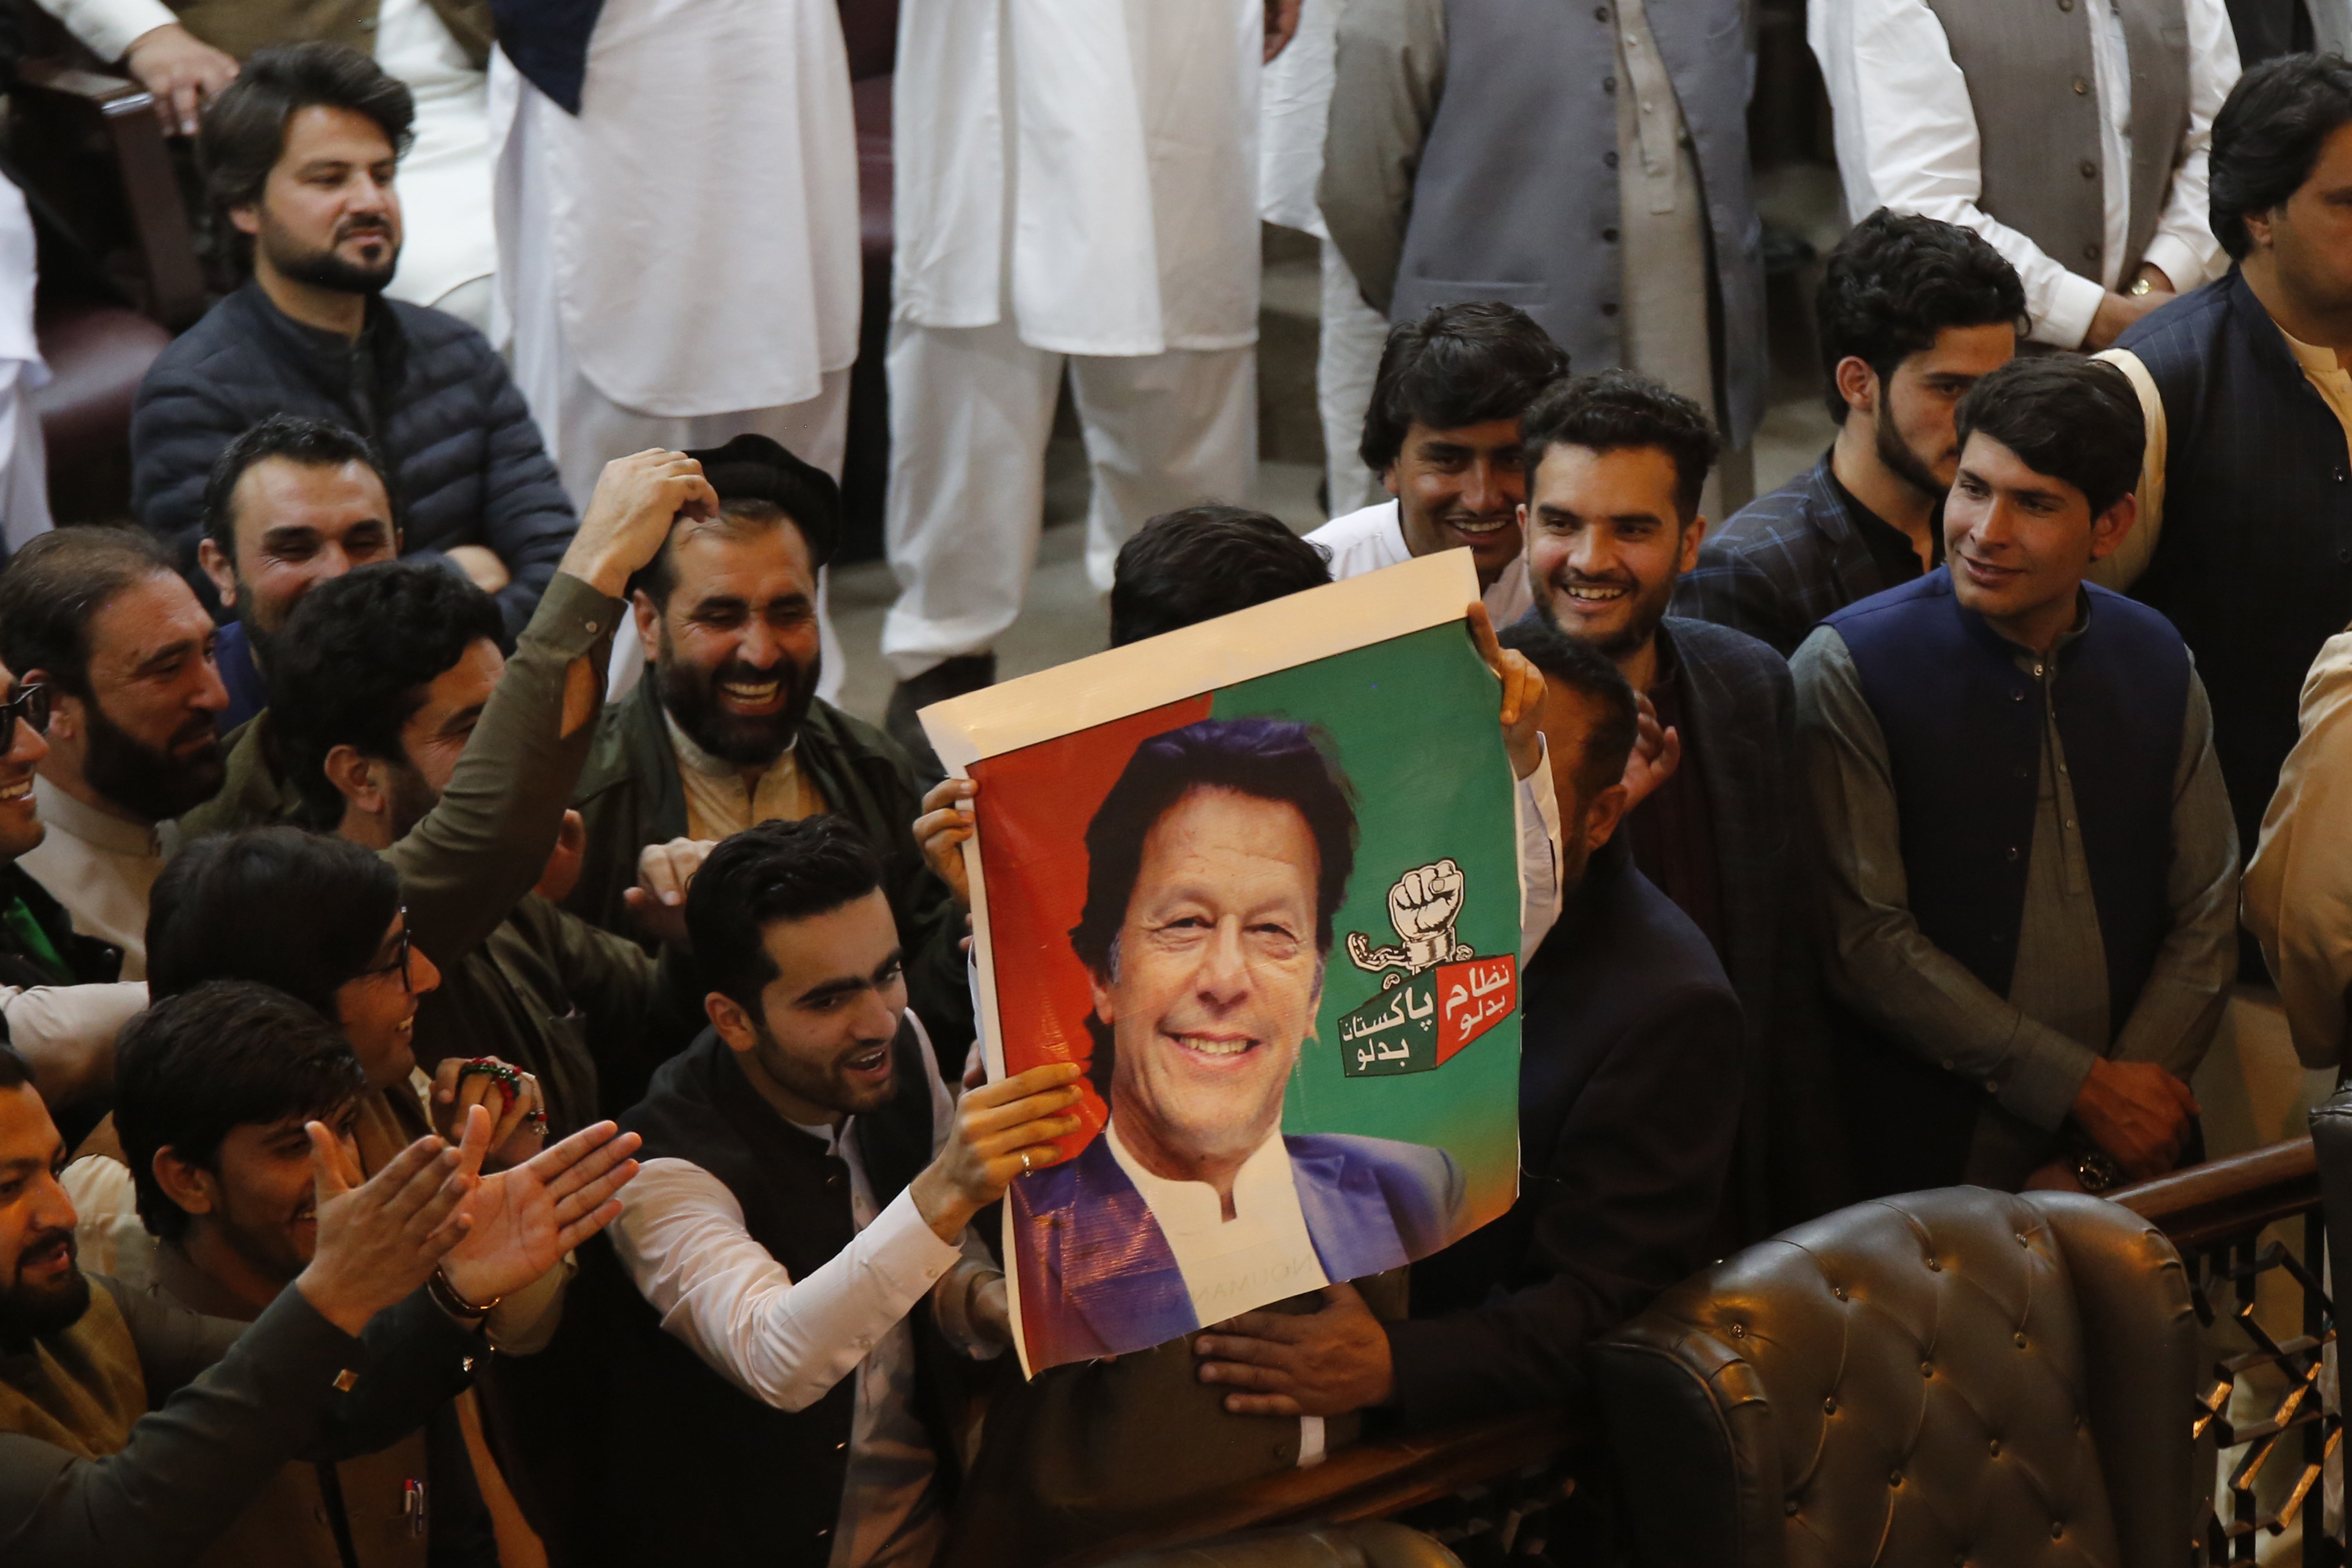 Supporters of convicted former prime minister Imran Khan attend the KPK provincial assembly oath-taking session of newly elected members, in Peshawar, Pakistan